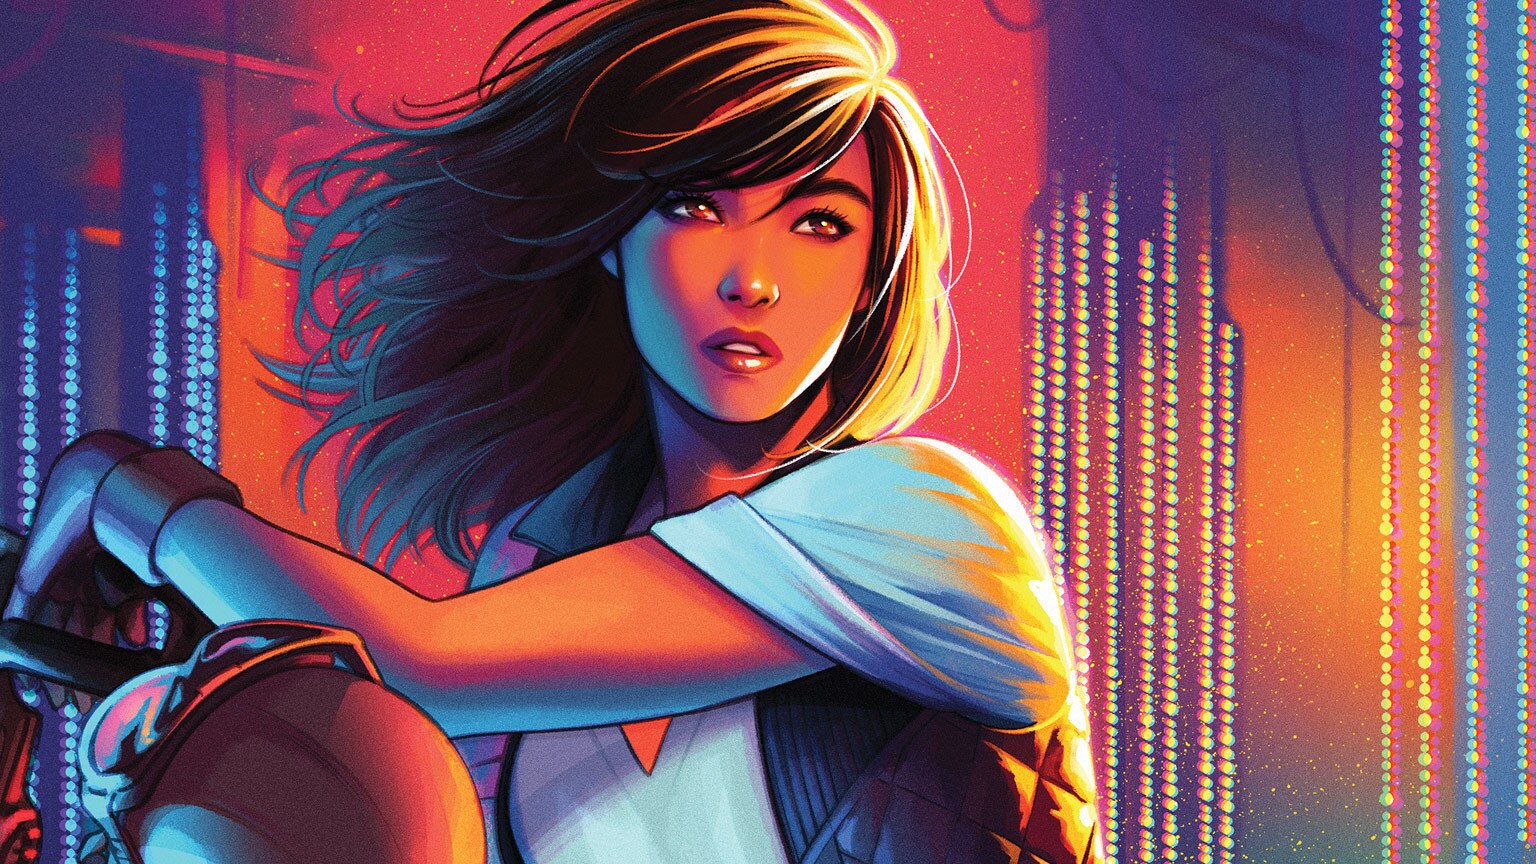 There’s a New Bounty in Marvel’s Doctor Aphra #6 - Exclusive Preview